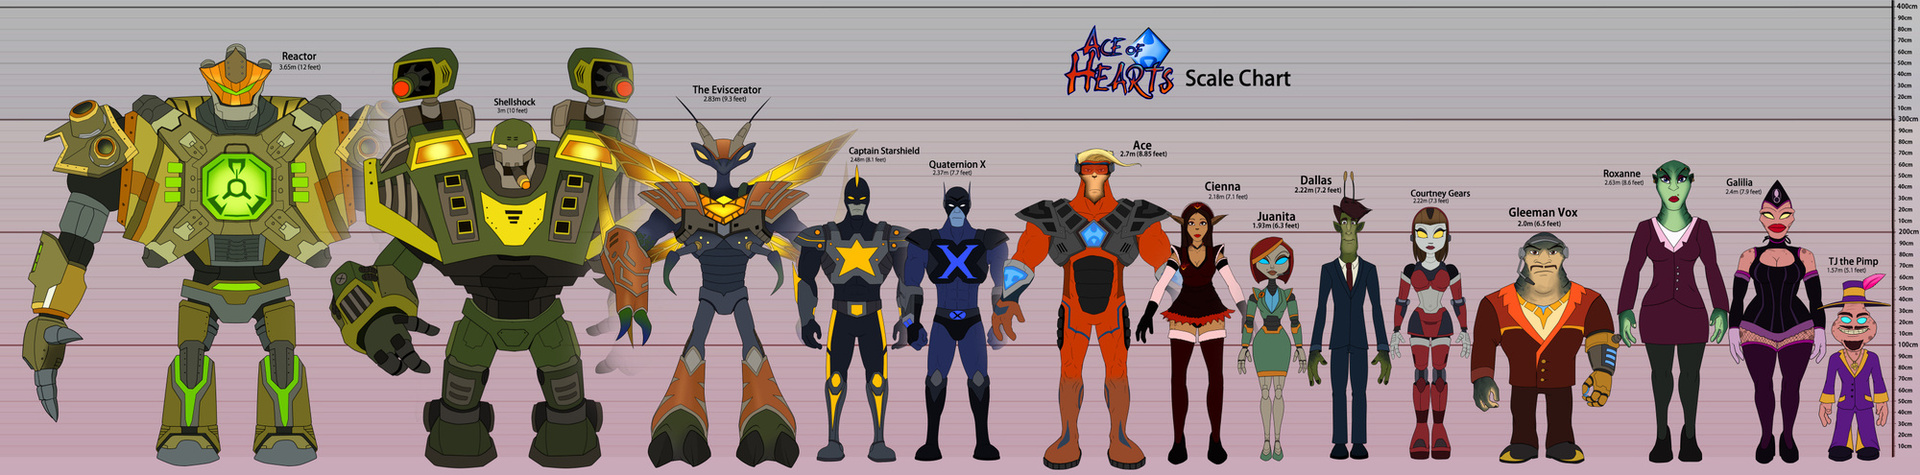 Character Height Chart - Ace of Hearts.jpg